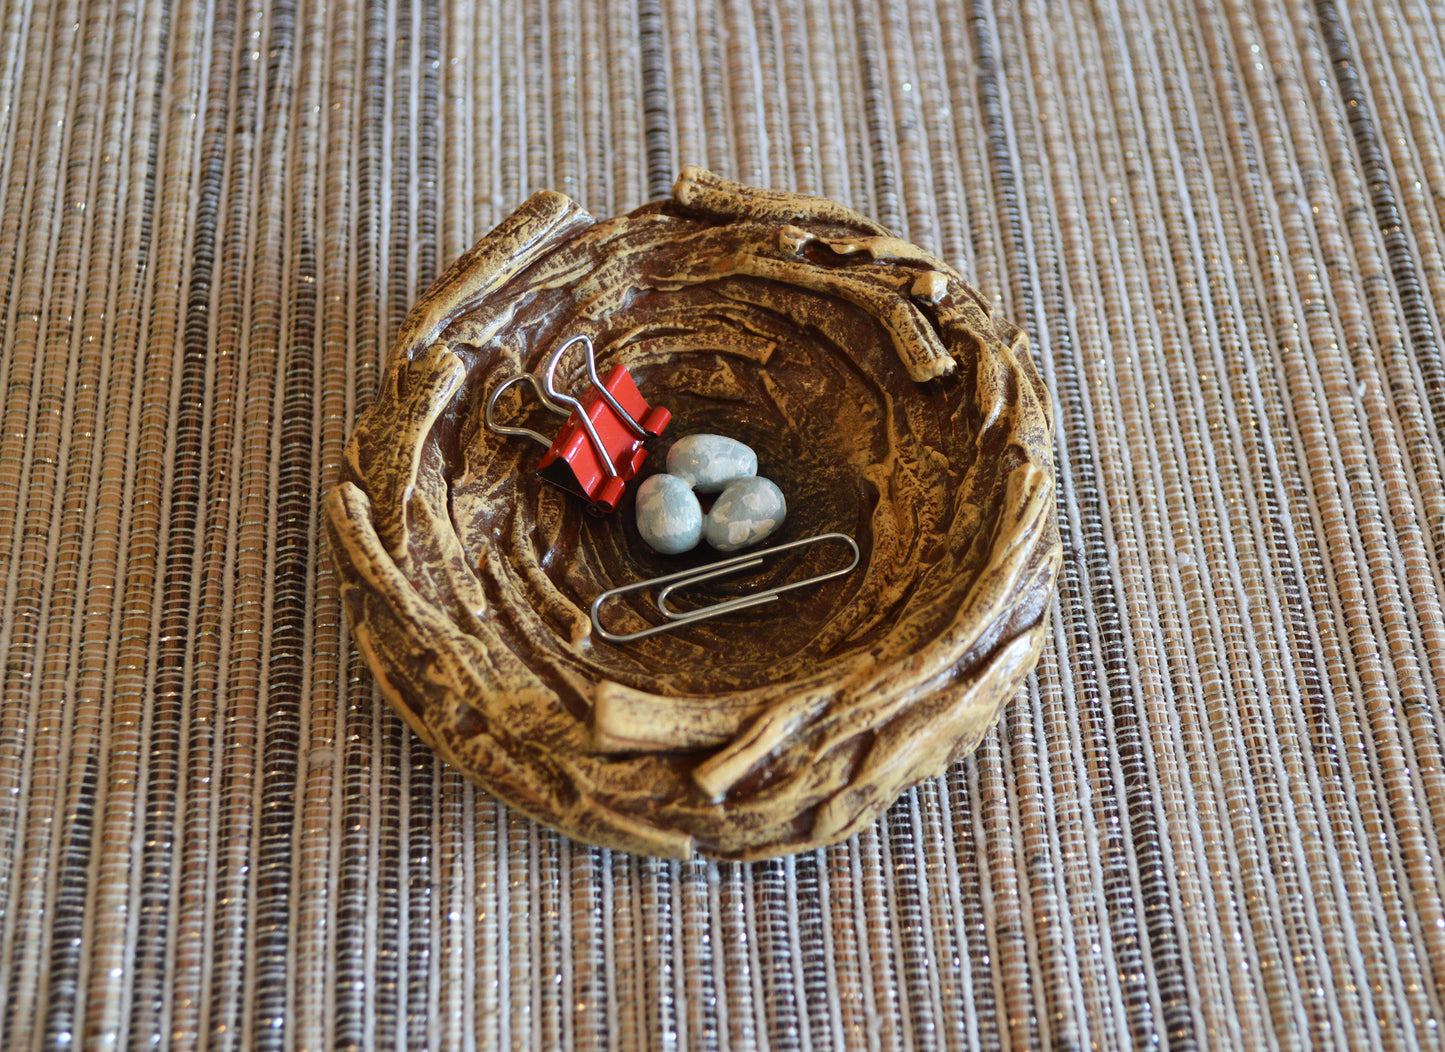 Bird nest dish, clay nest with blue eggs robin nest trinket mini dish plate bowl, unique Spring Summer gift Easter tiered tray decor